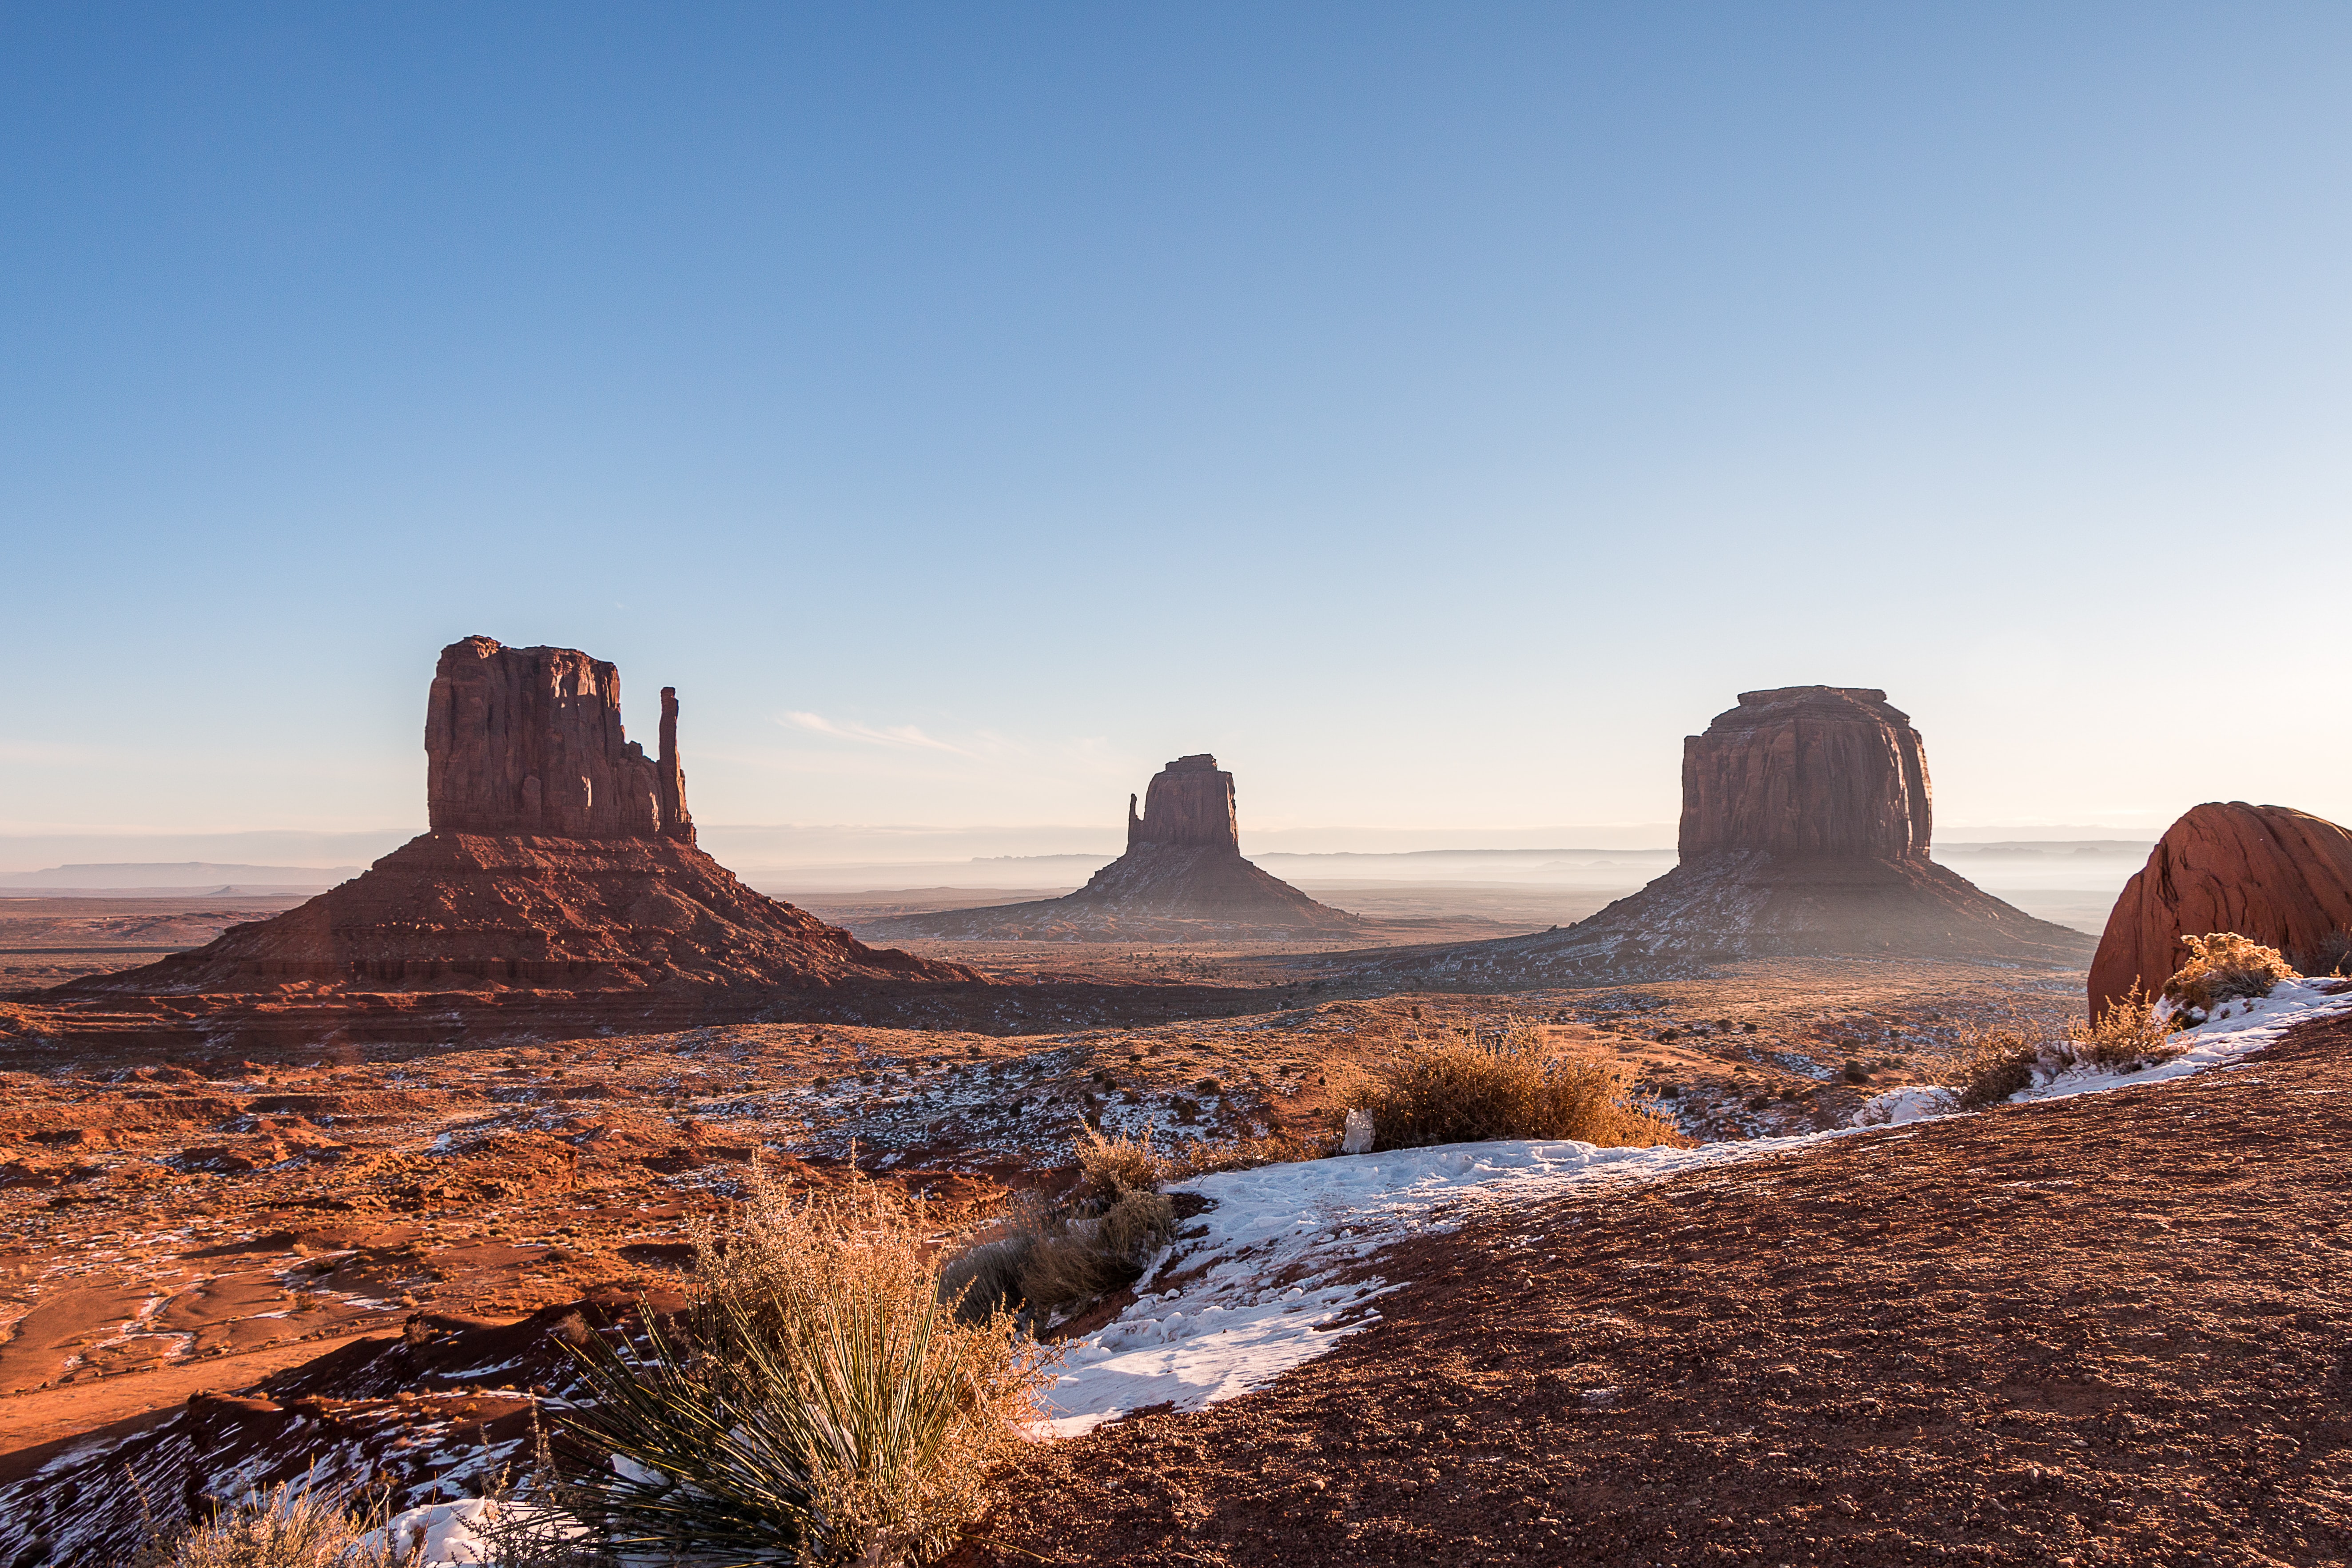 Monument Valley, located on Navajo lands